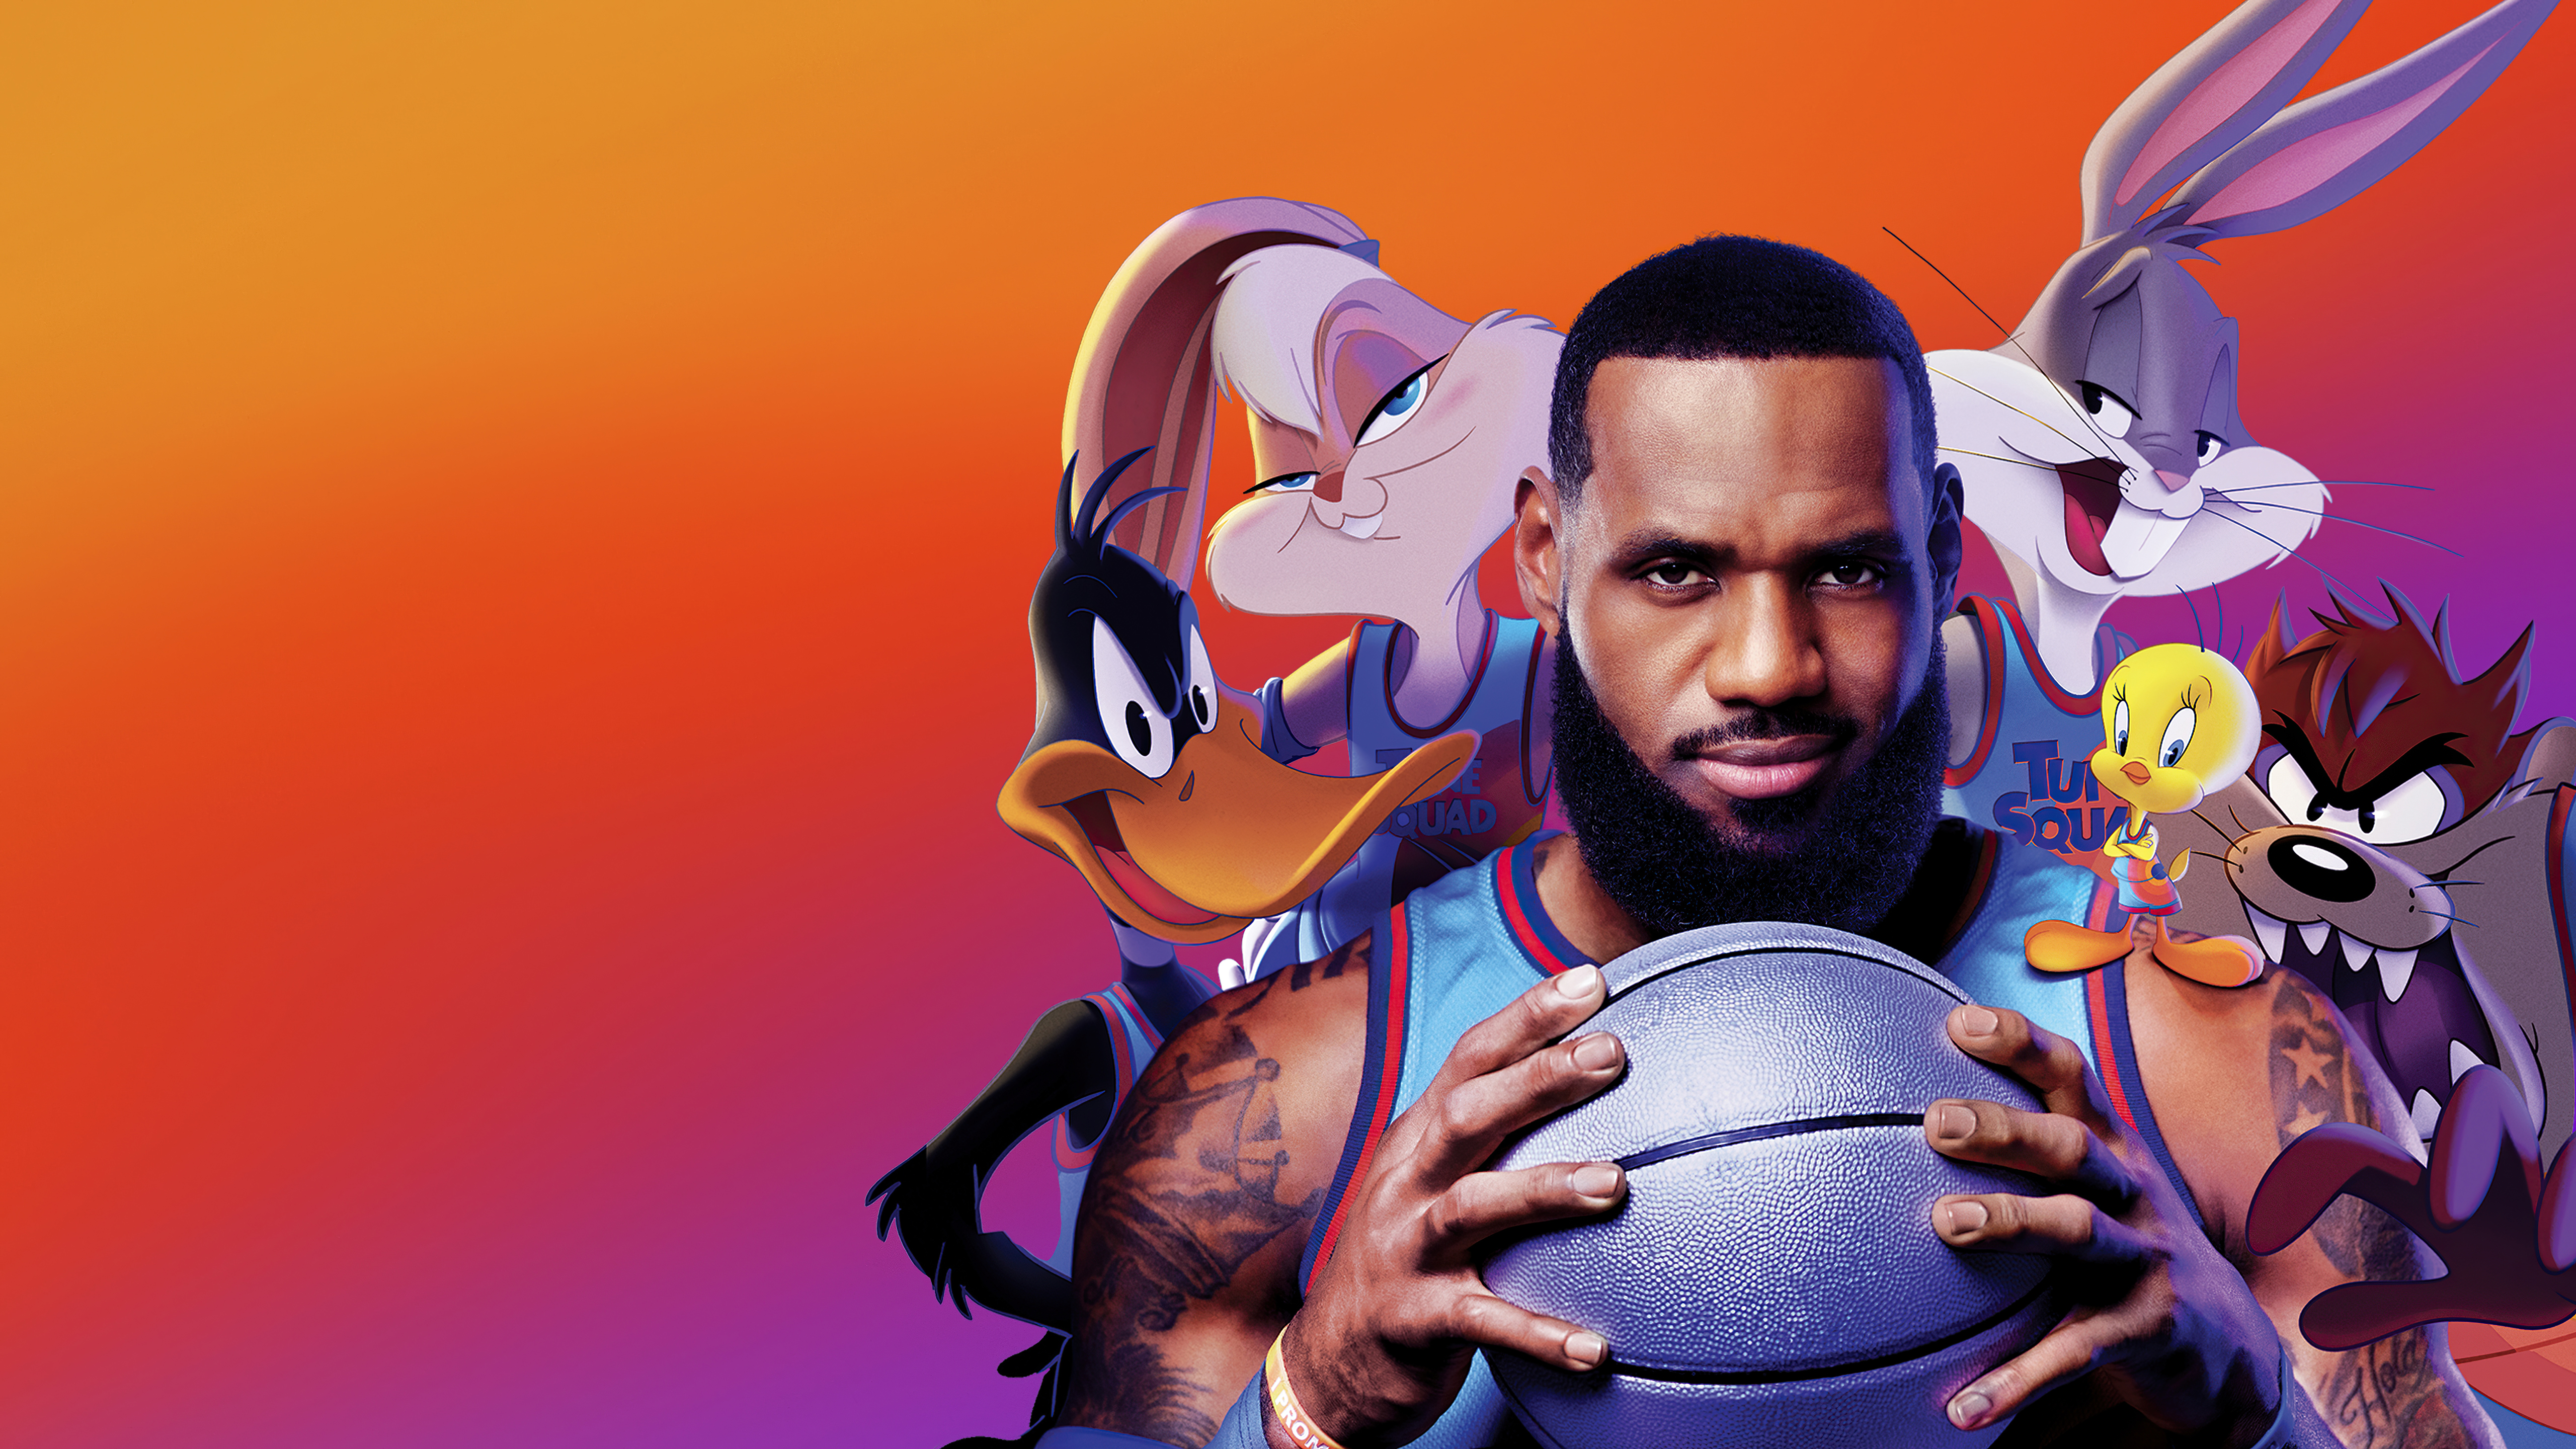 Daffy Duck Space Jam 2 A New Legacy Wallpaper 4K #7.3516